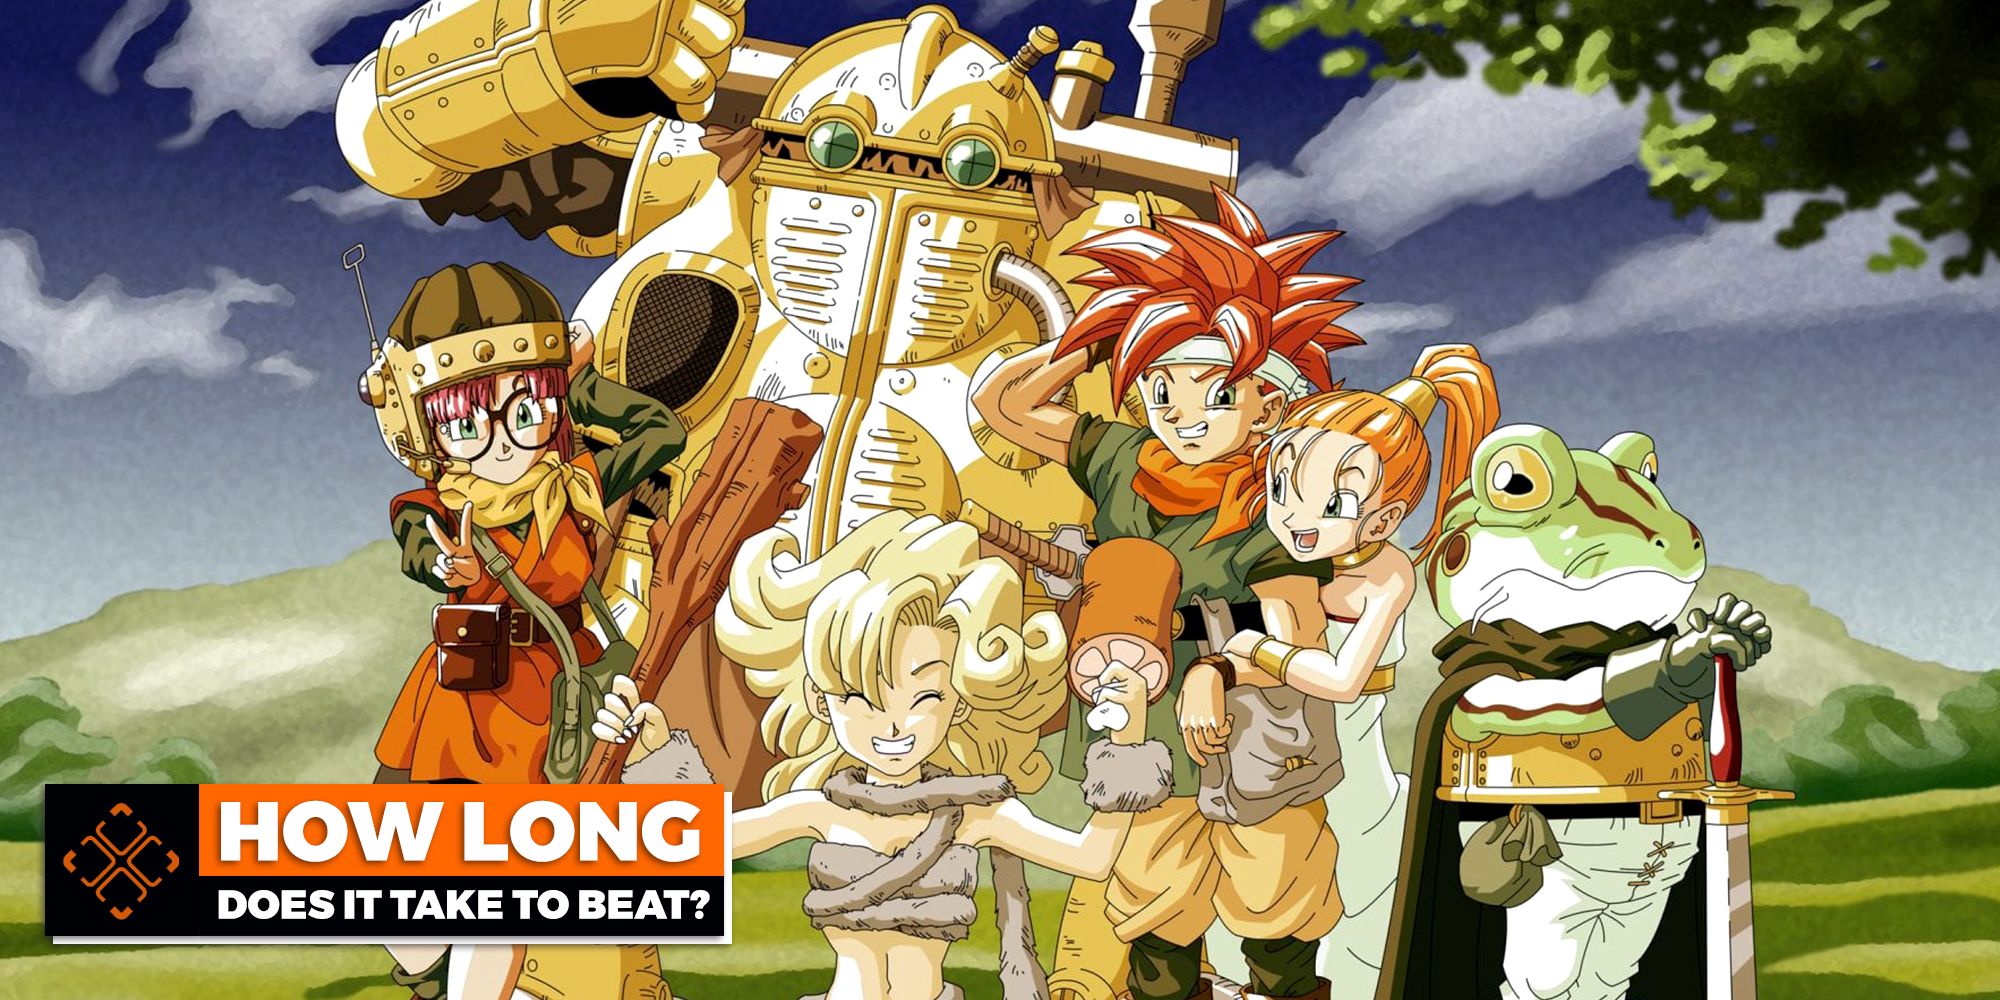 Game art from Chrono Trigger.